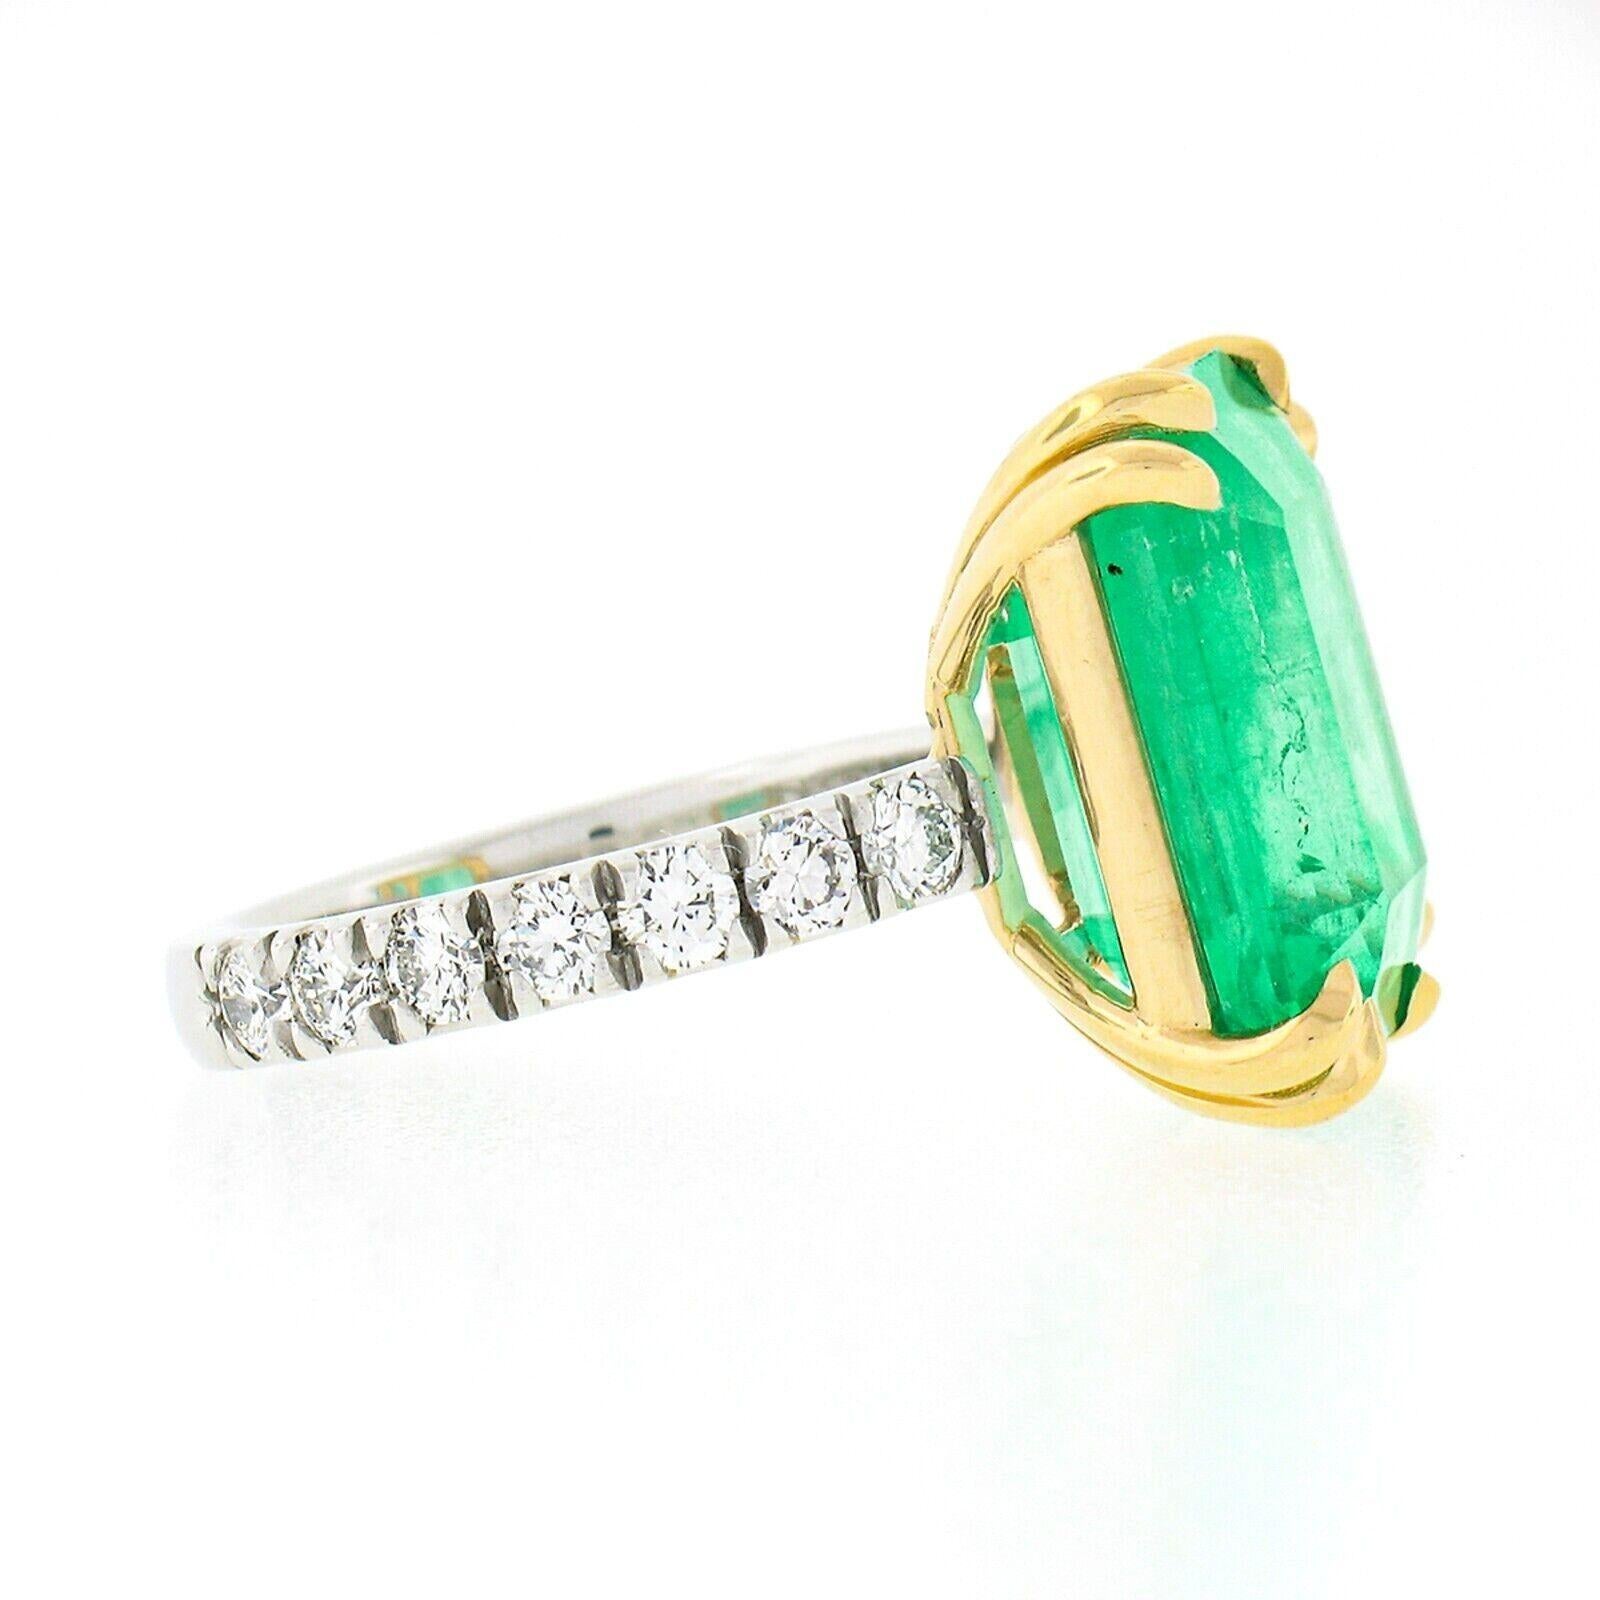 Emerald Cut New 18k Gold AGL 10.54ct Colombian Emerald Cocktail Ring w/ Pave Diamond Shank For Sale